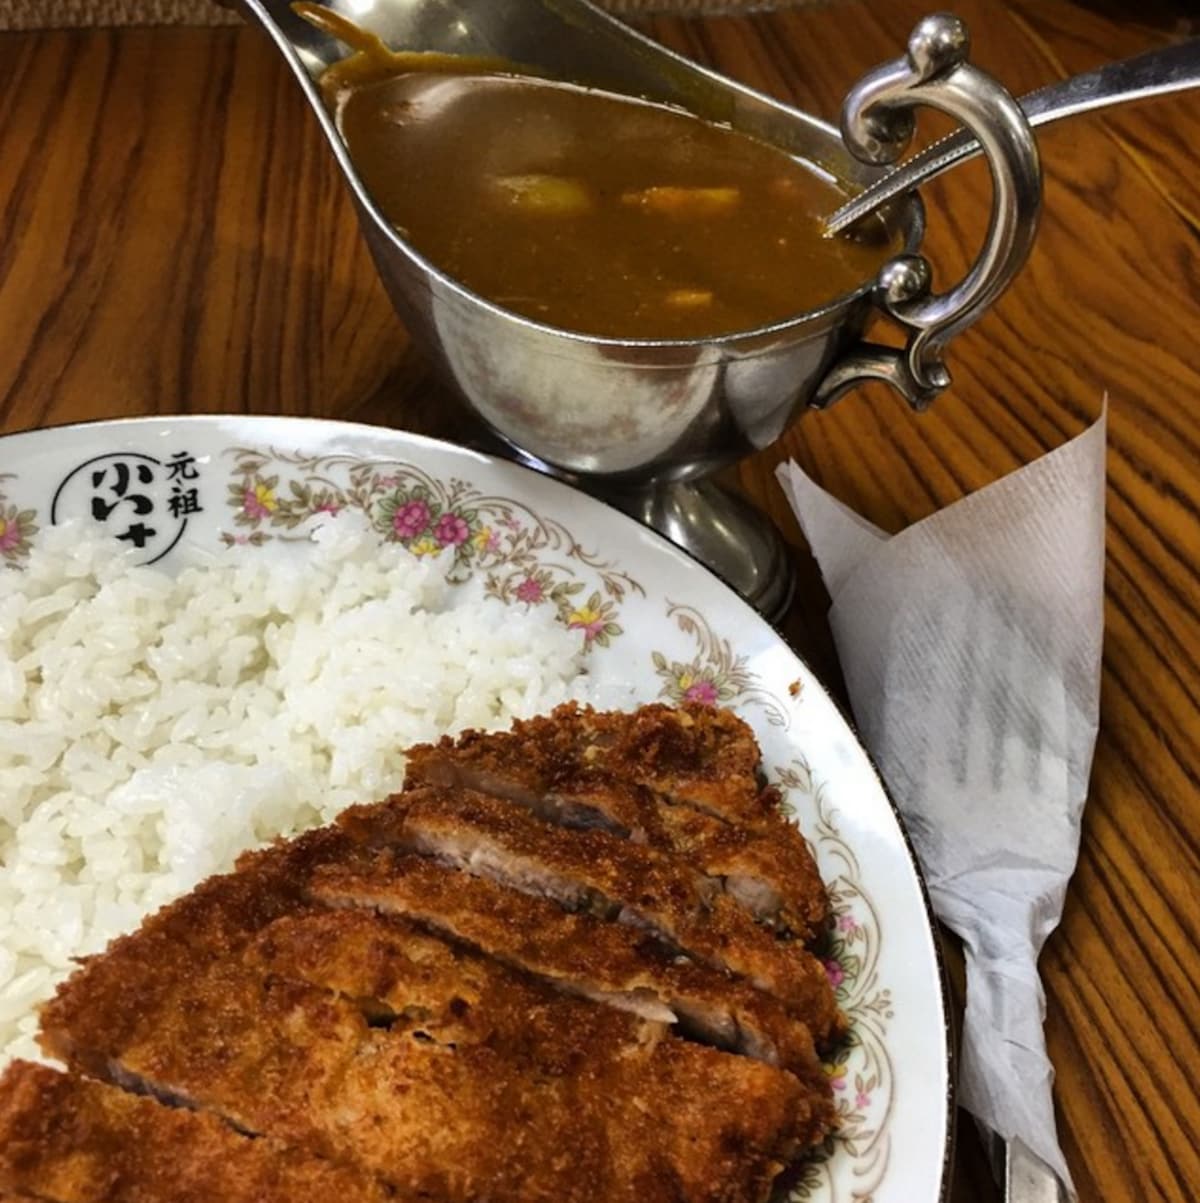 12. Pork cutlet curry from Ganso Koike